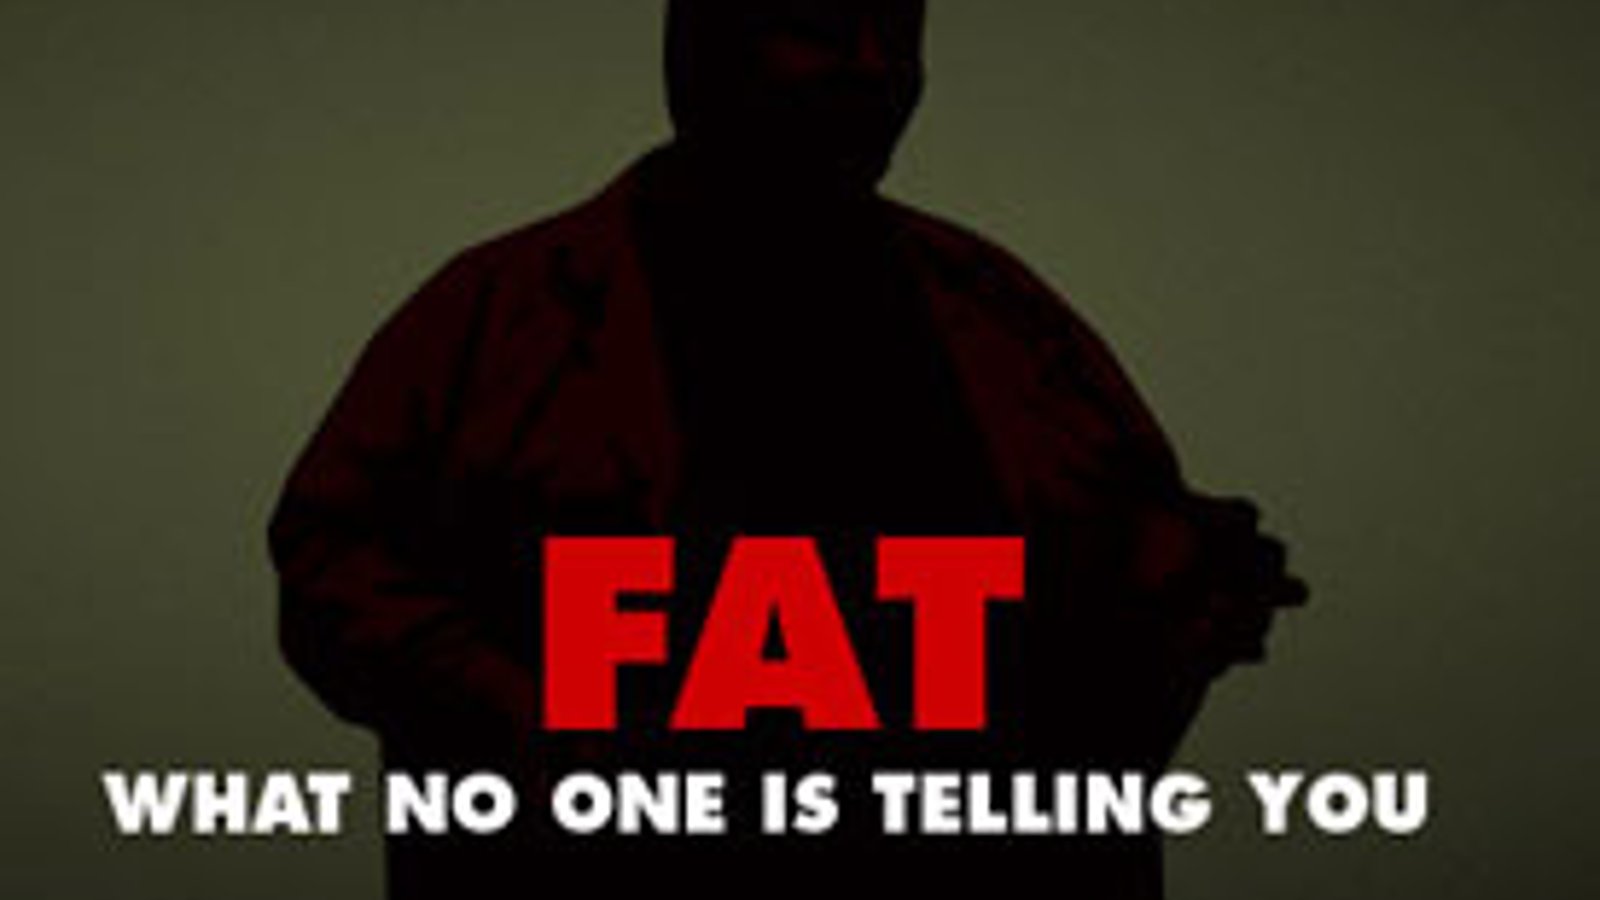 FAT: What No One is Telling You